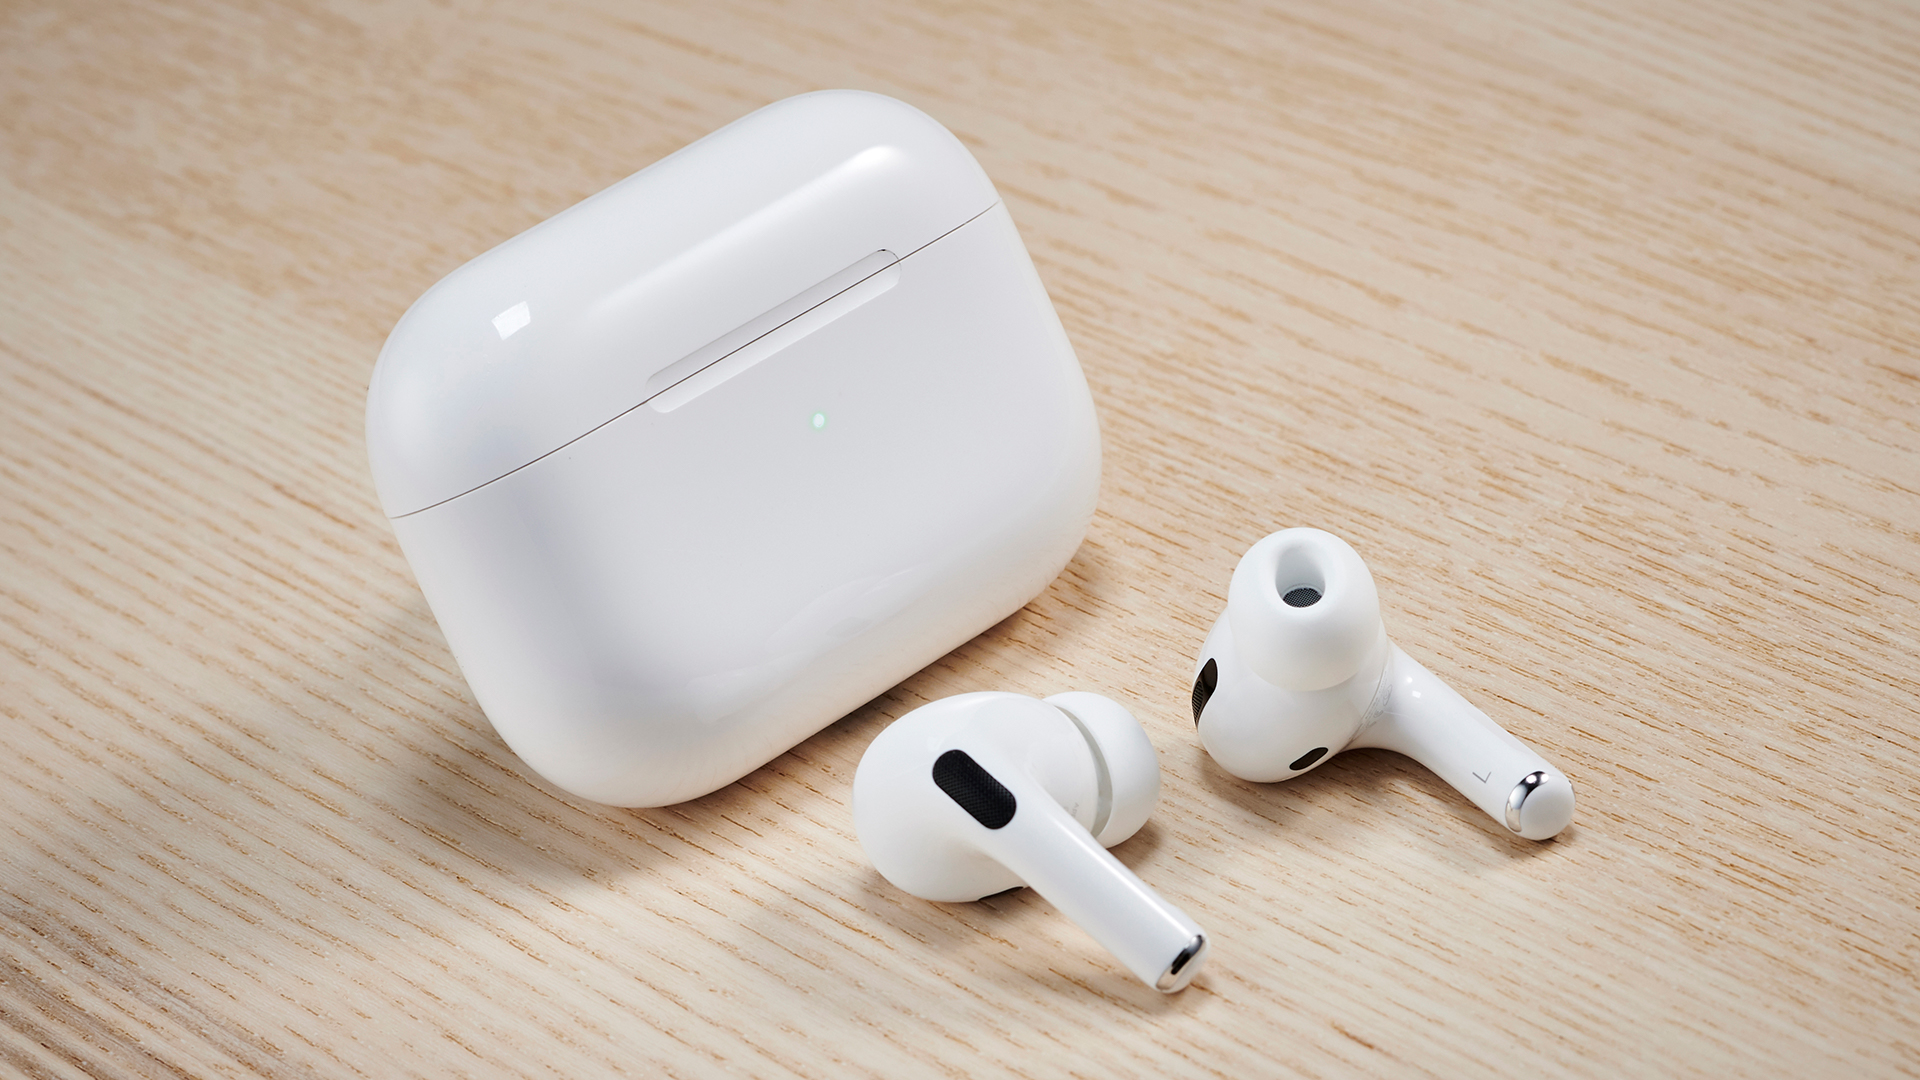 Apple AirPods Pro review: clever earbuds with great sound | T3